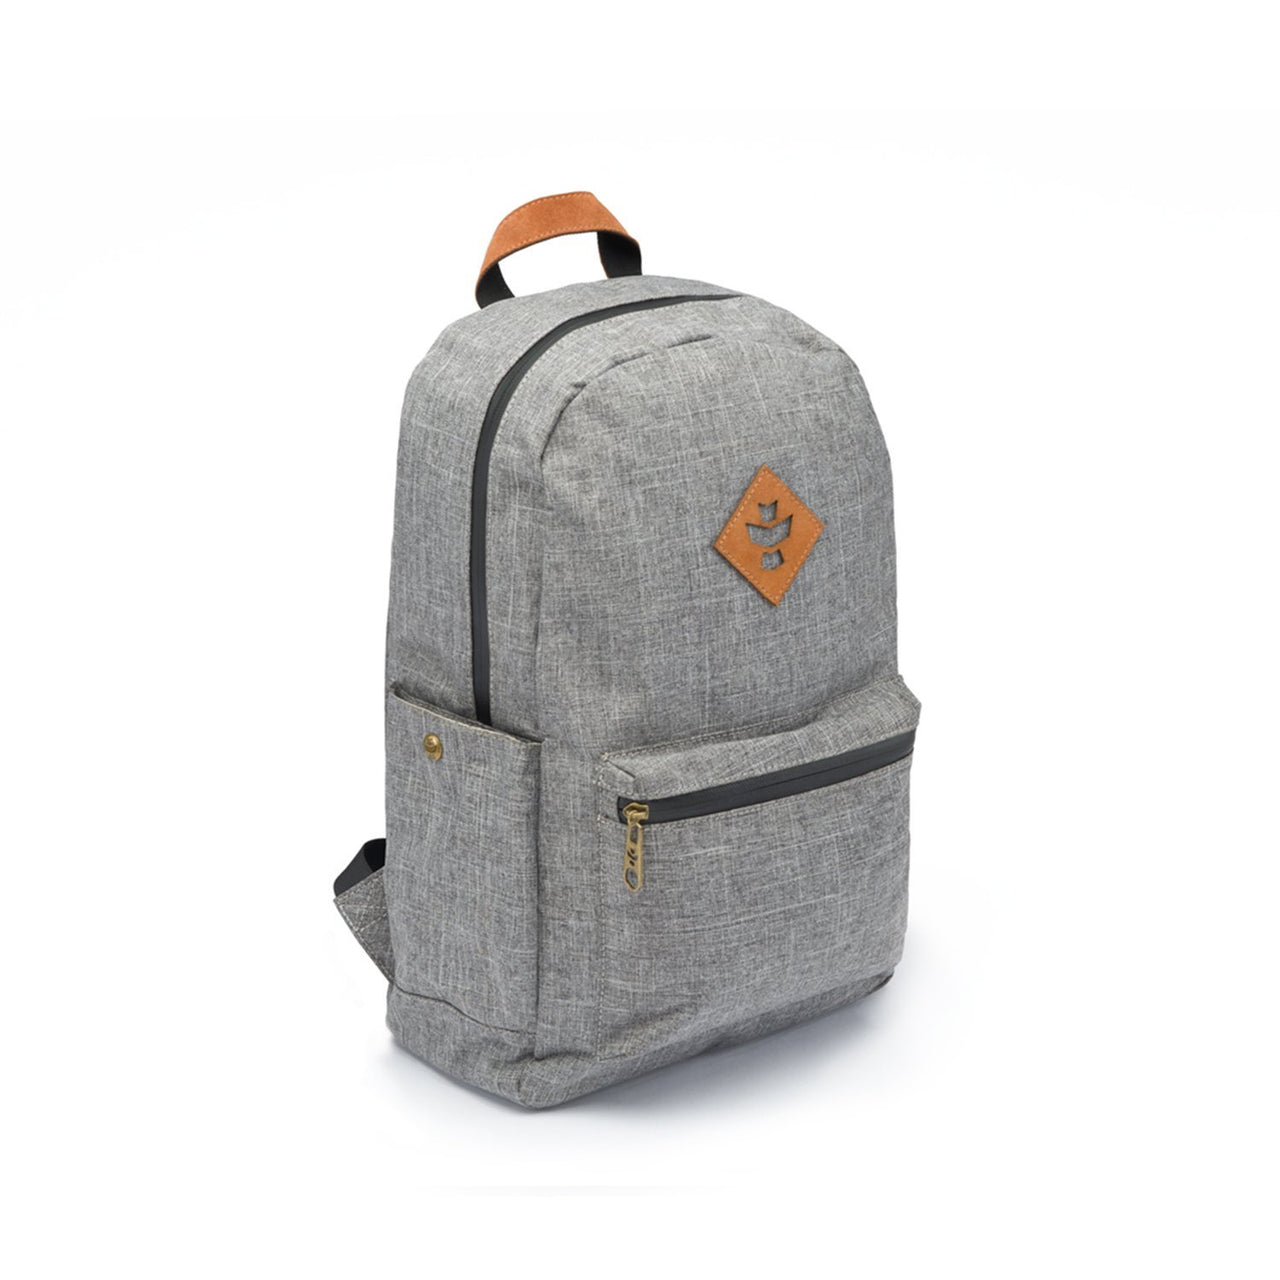 Revelry Escort Backpack | Bags & Cases | 420 Science